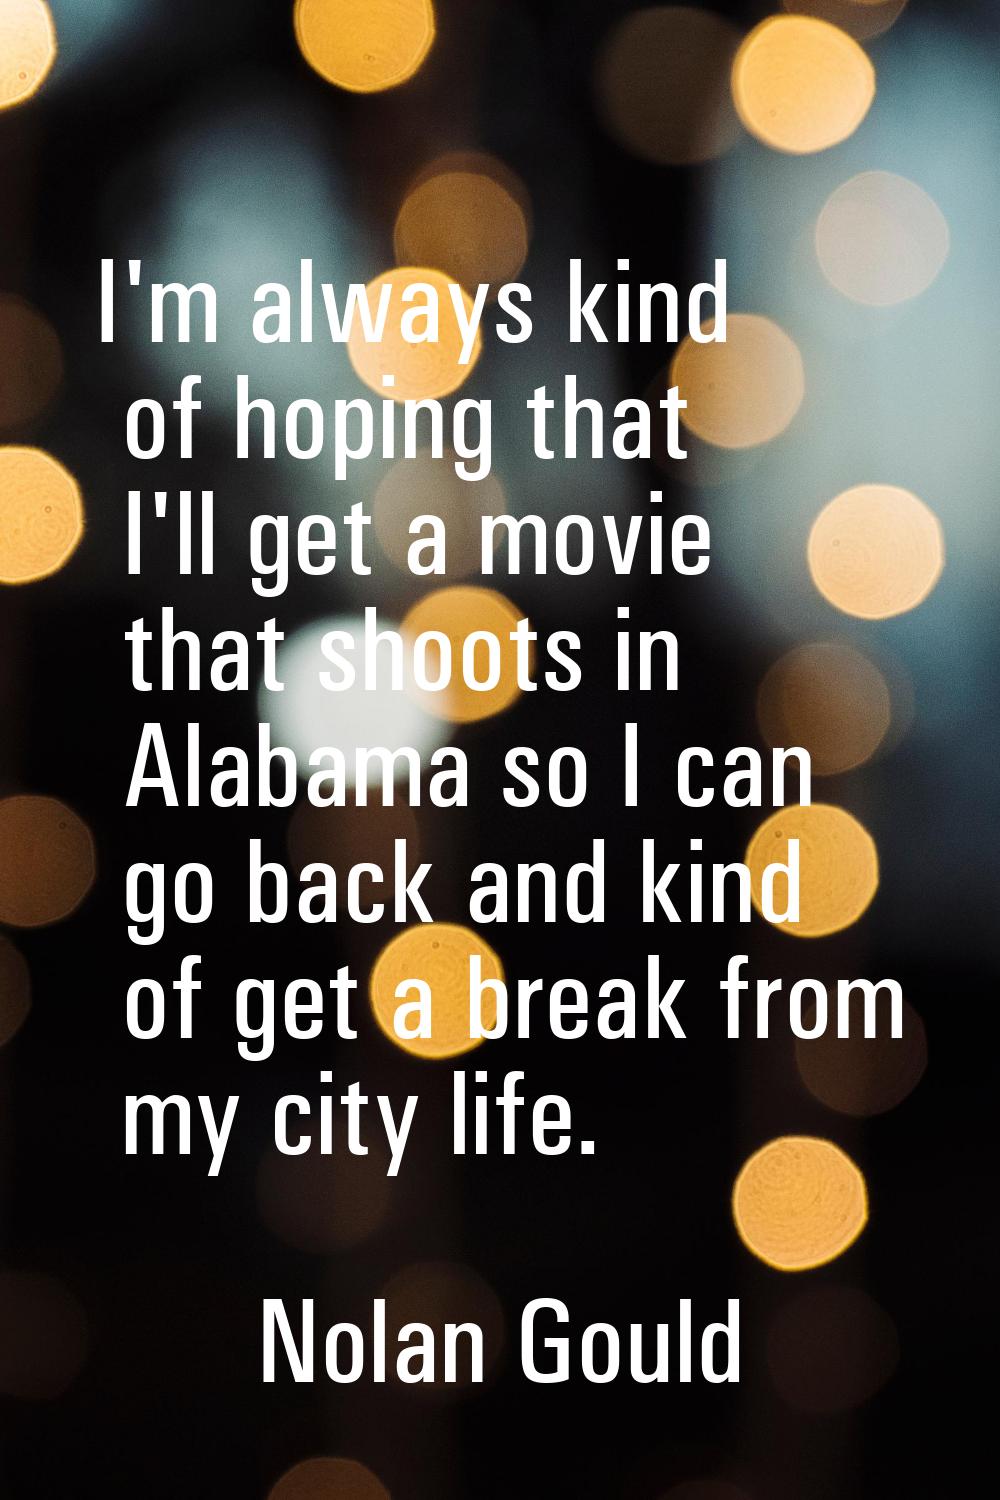 I'm always kind of hoping that I'll get a movie that shoots in Alabama so I can go back and kind of